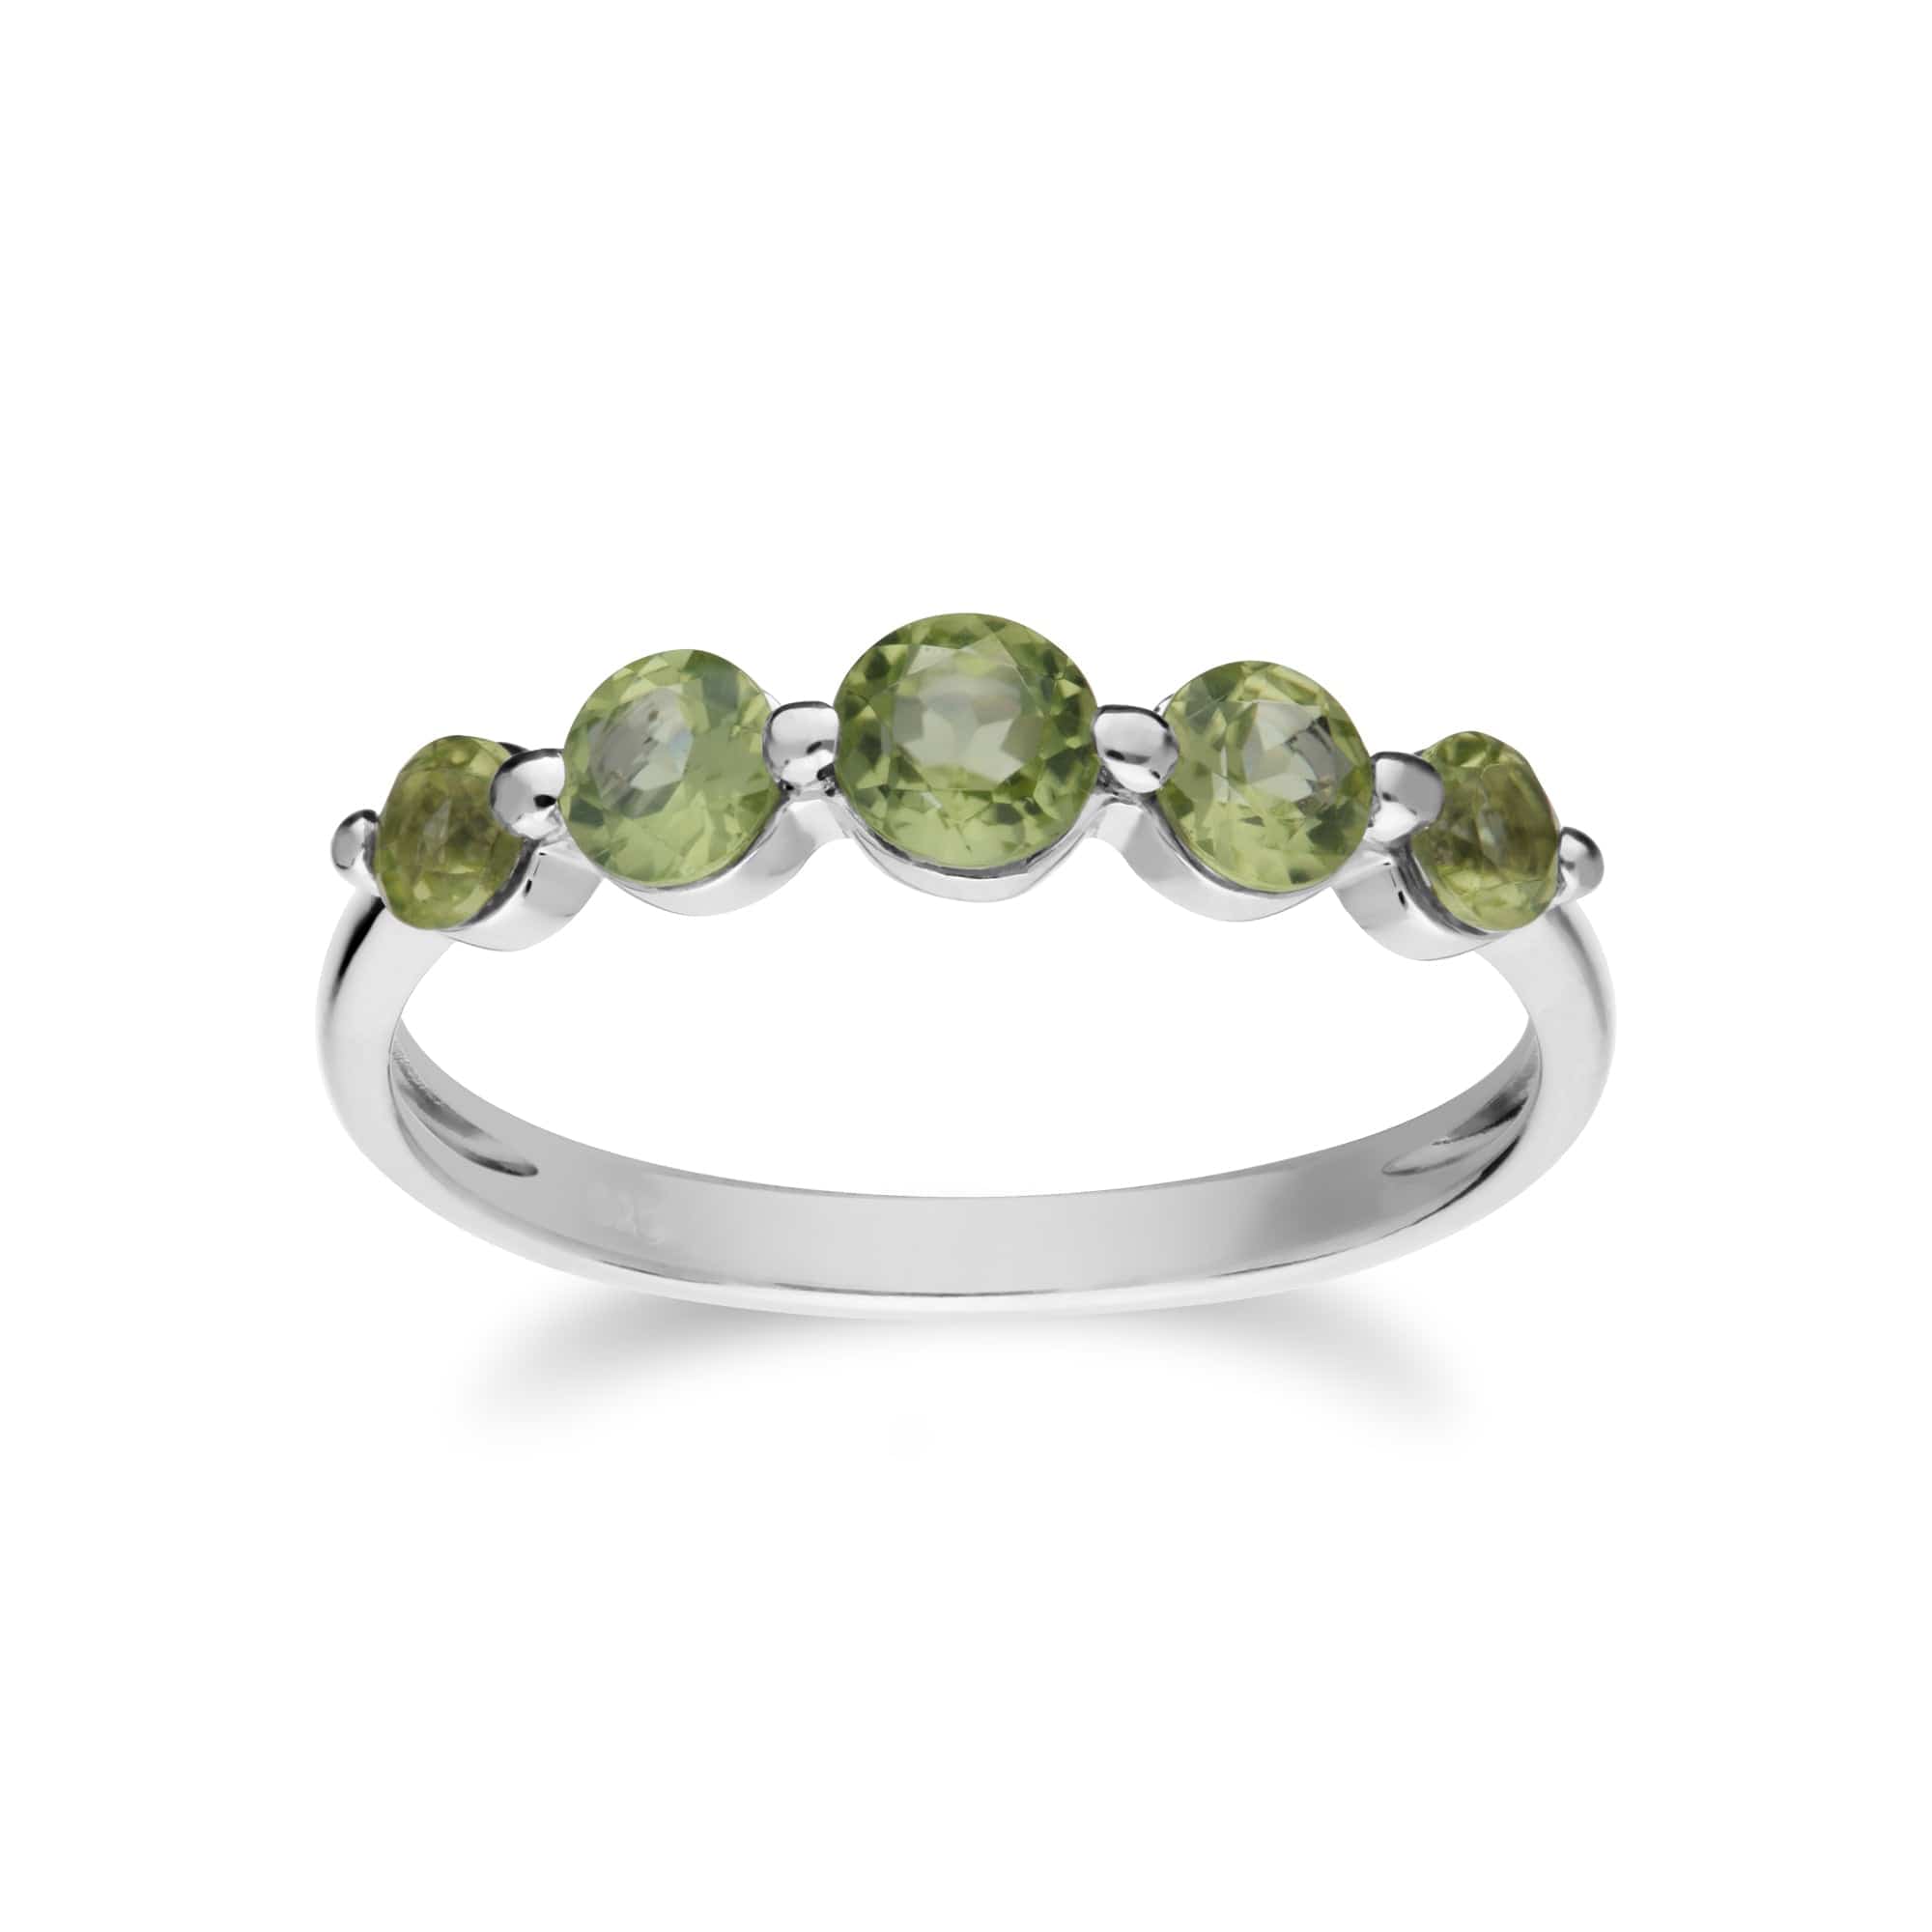 270L011004925-270R055904925 Classic Round Peridot Five Stone Bracelet &  Ring Set in 925 Sterling Silver 3